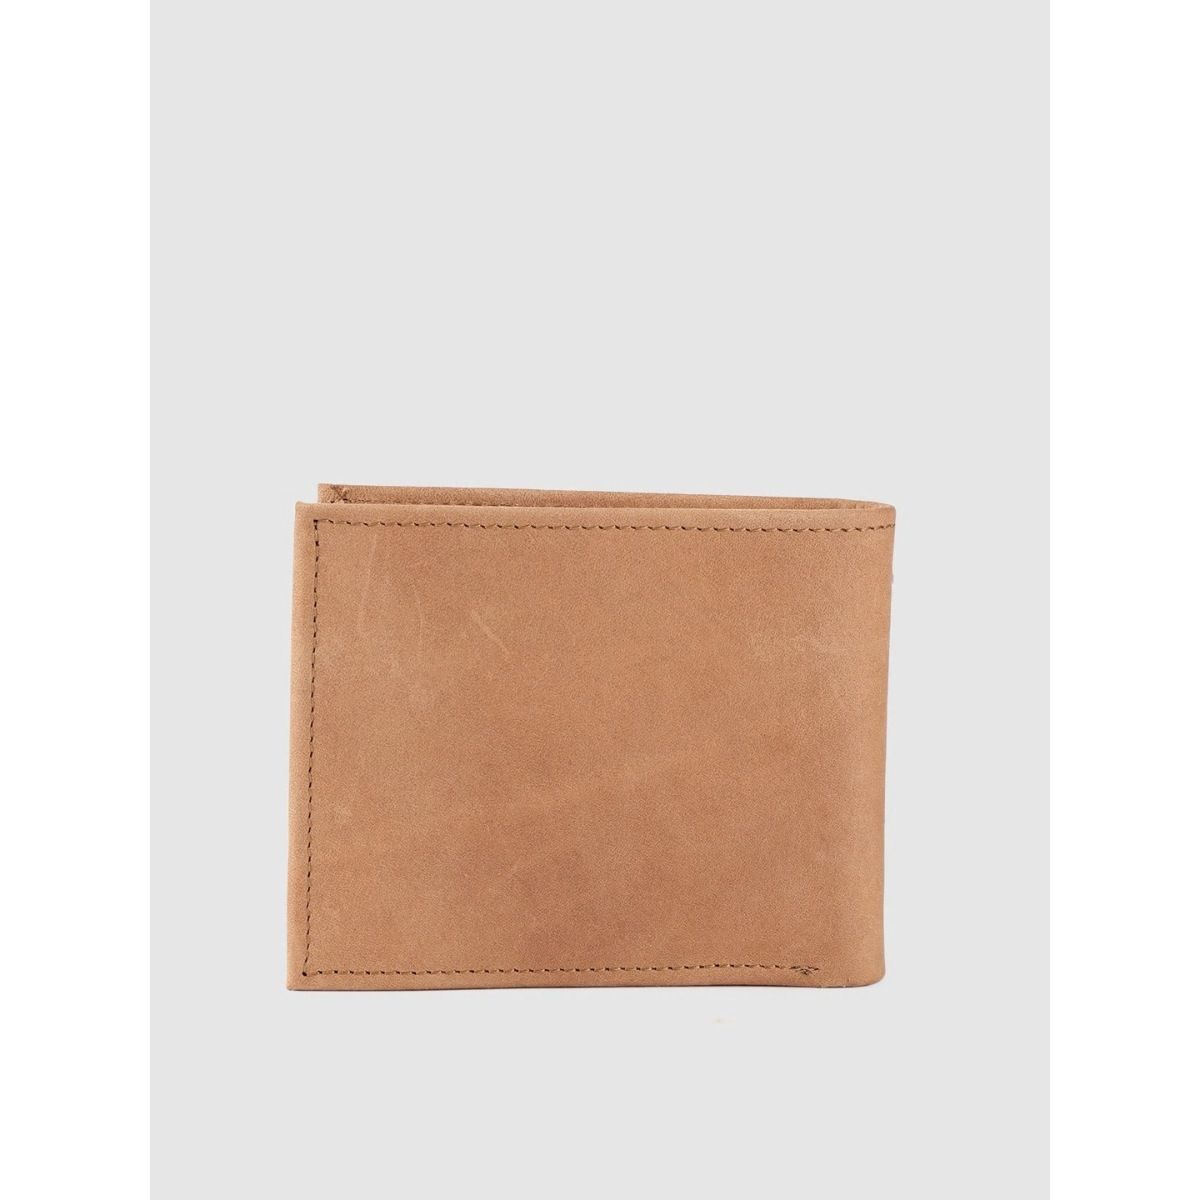 Mens Brown Leather Wallet Manufacturer Supplier from Delhi India